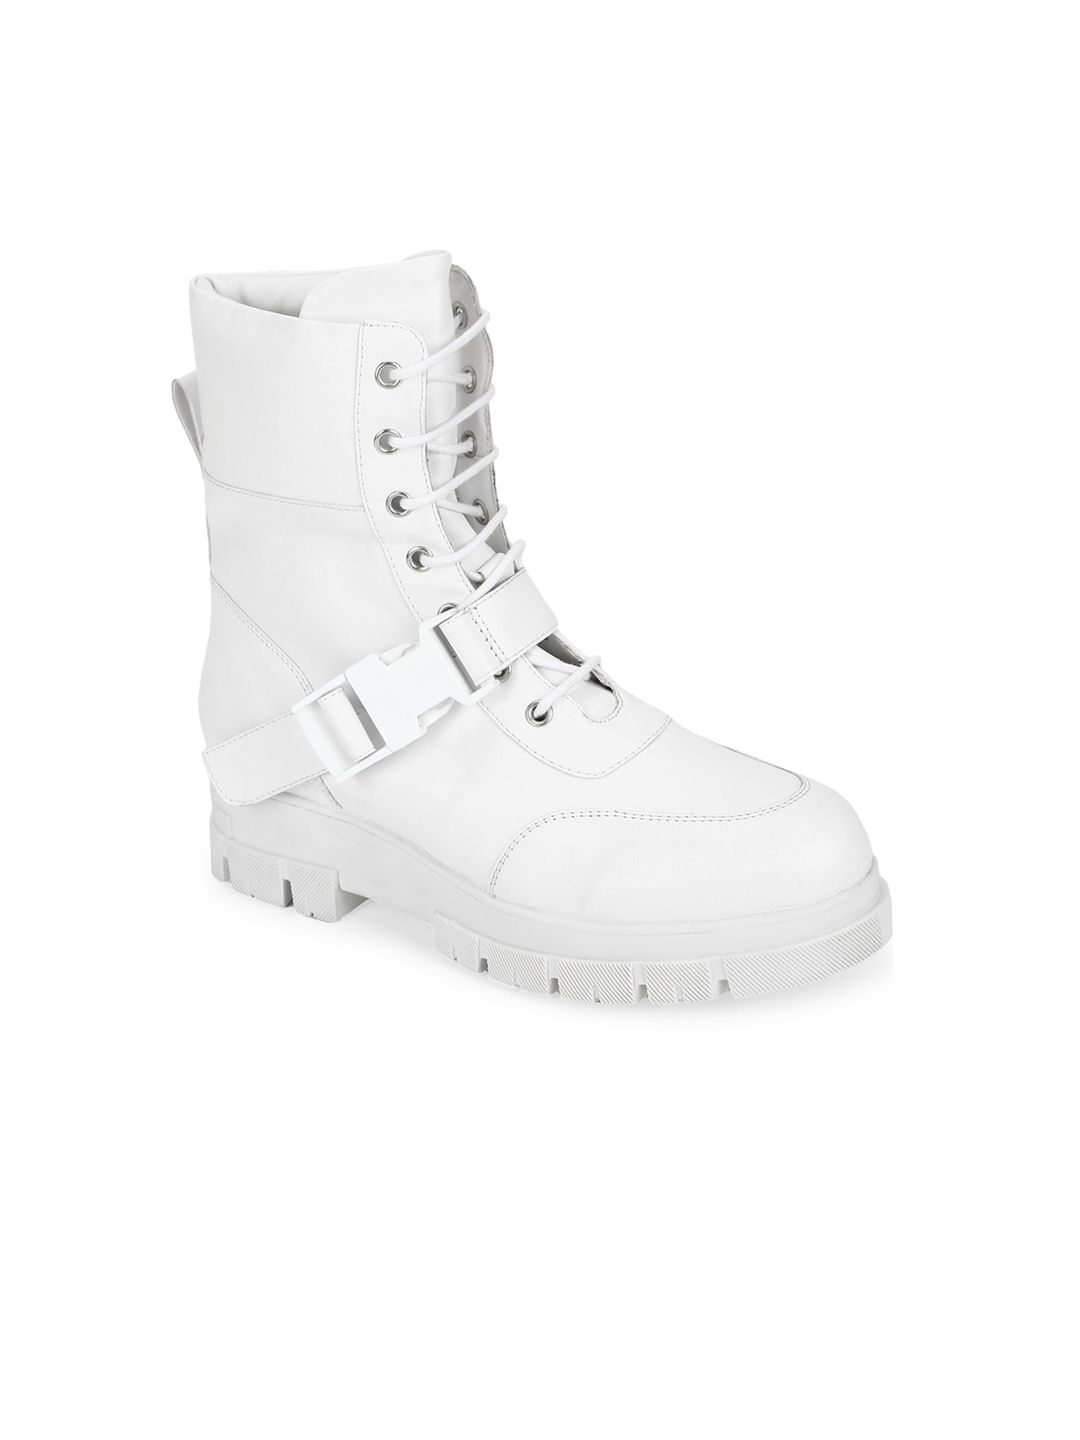 Truffle Collection Women White PU High-Top Flatform Heeled Boots with Buckles Price in India